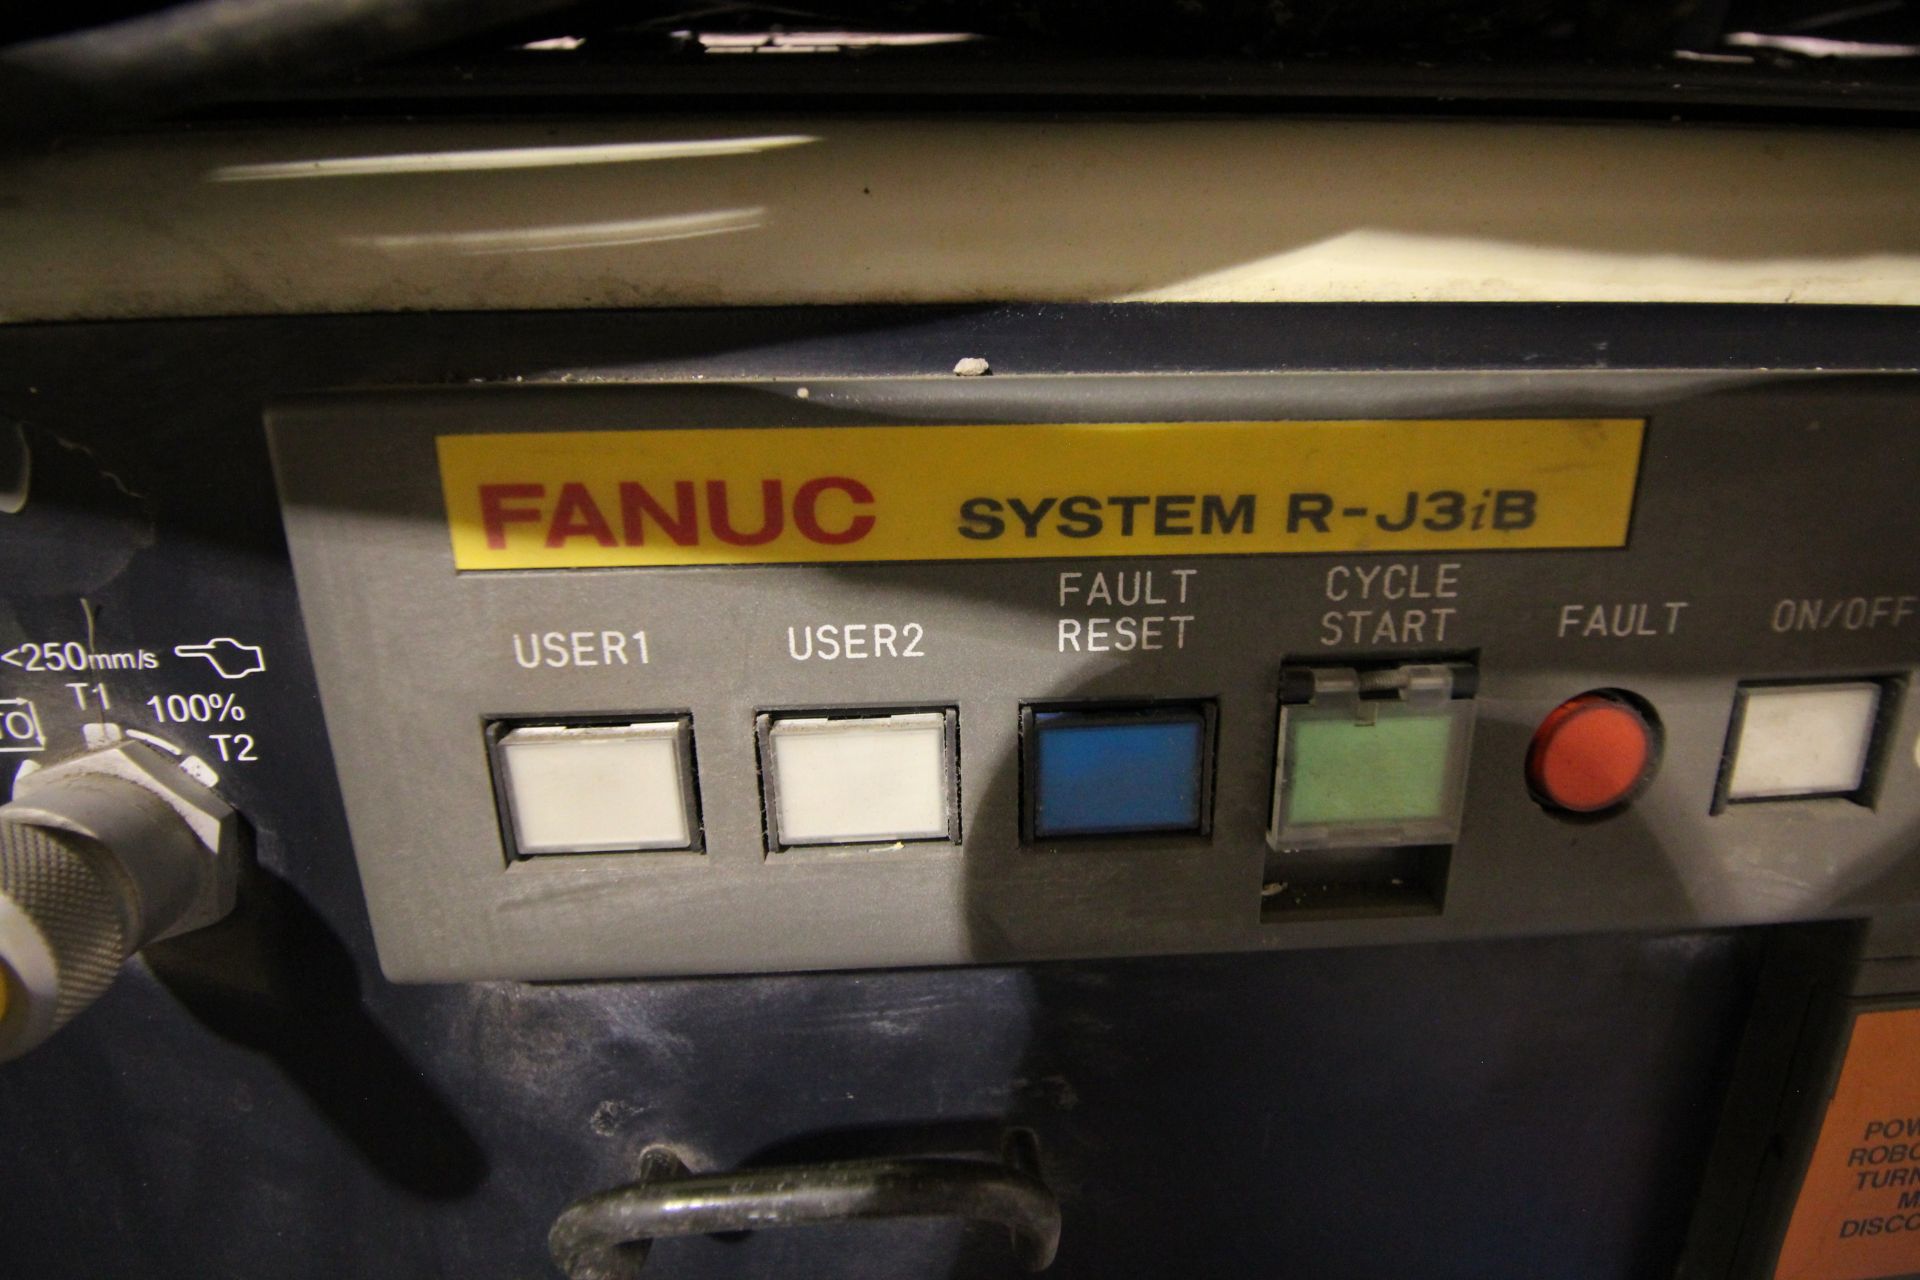 FANUC ROBOT S-500iB WITH R-J3iB CONTROLS, TEACH PENDANT & CABLES, YEAR 2003, SN 57932 - Image 5 of 7